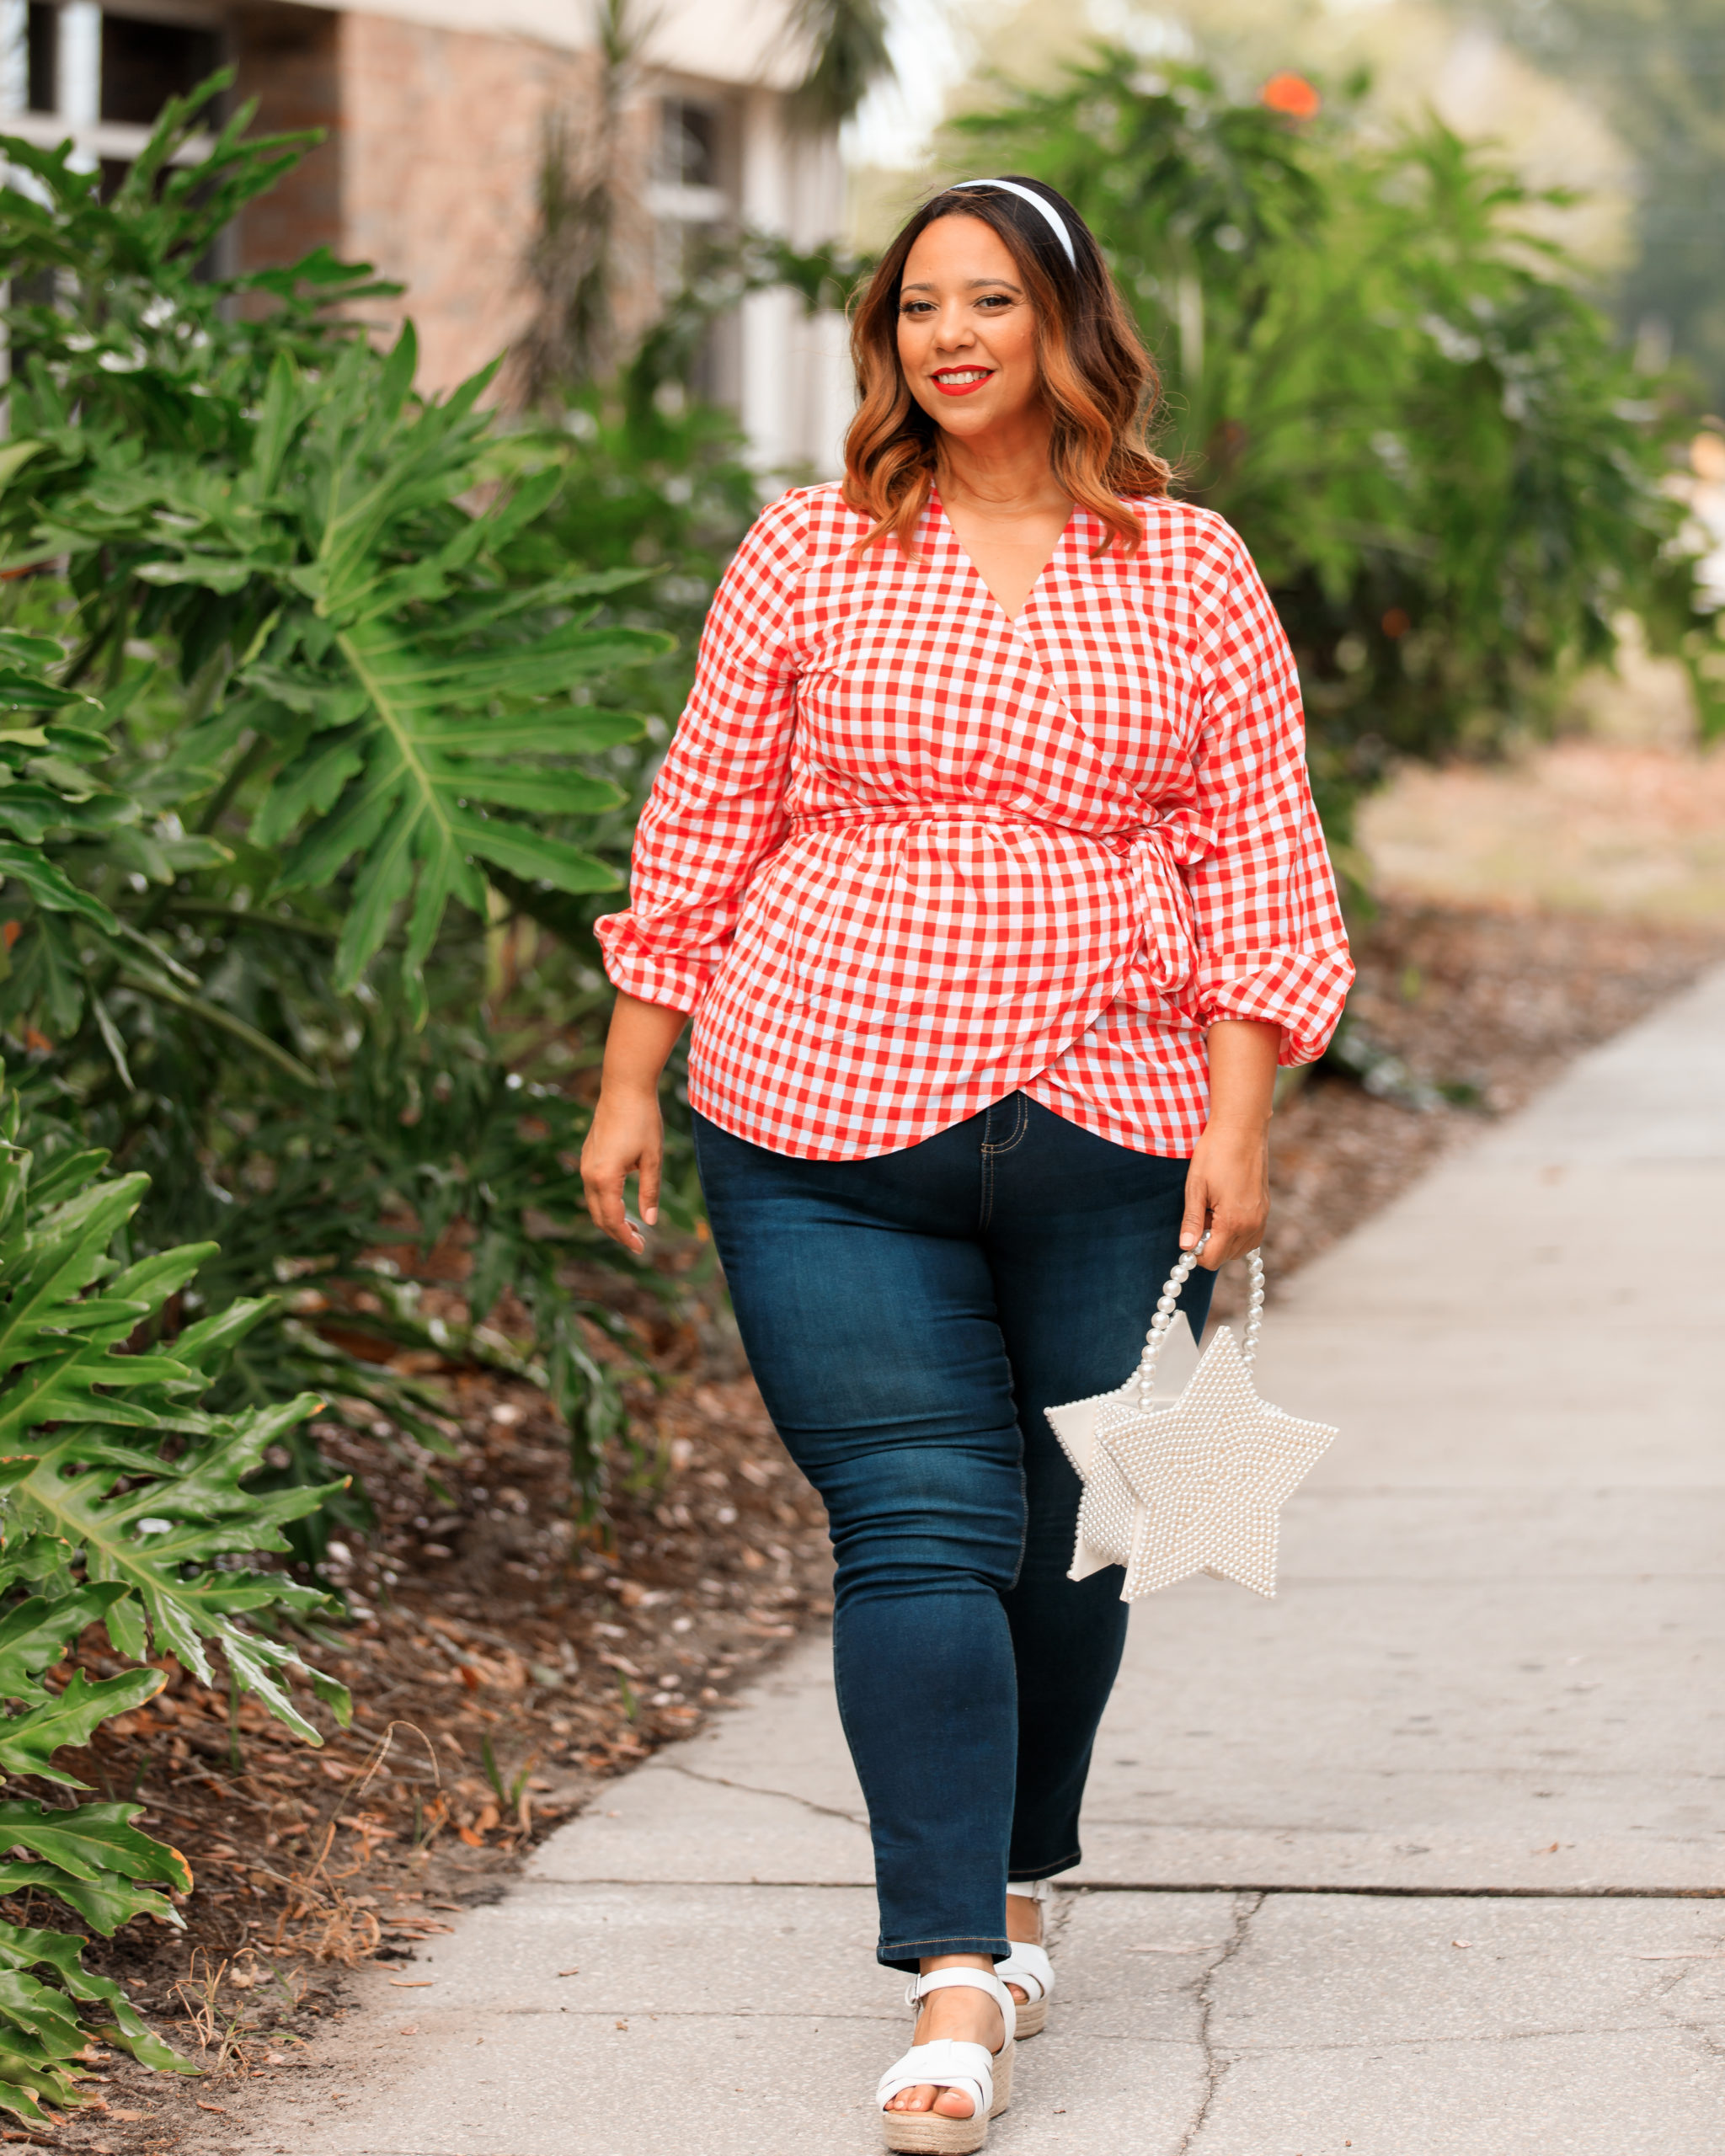 Red & White Gingham Wrap Top & Jeans